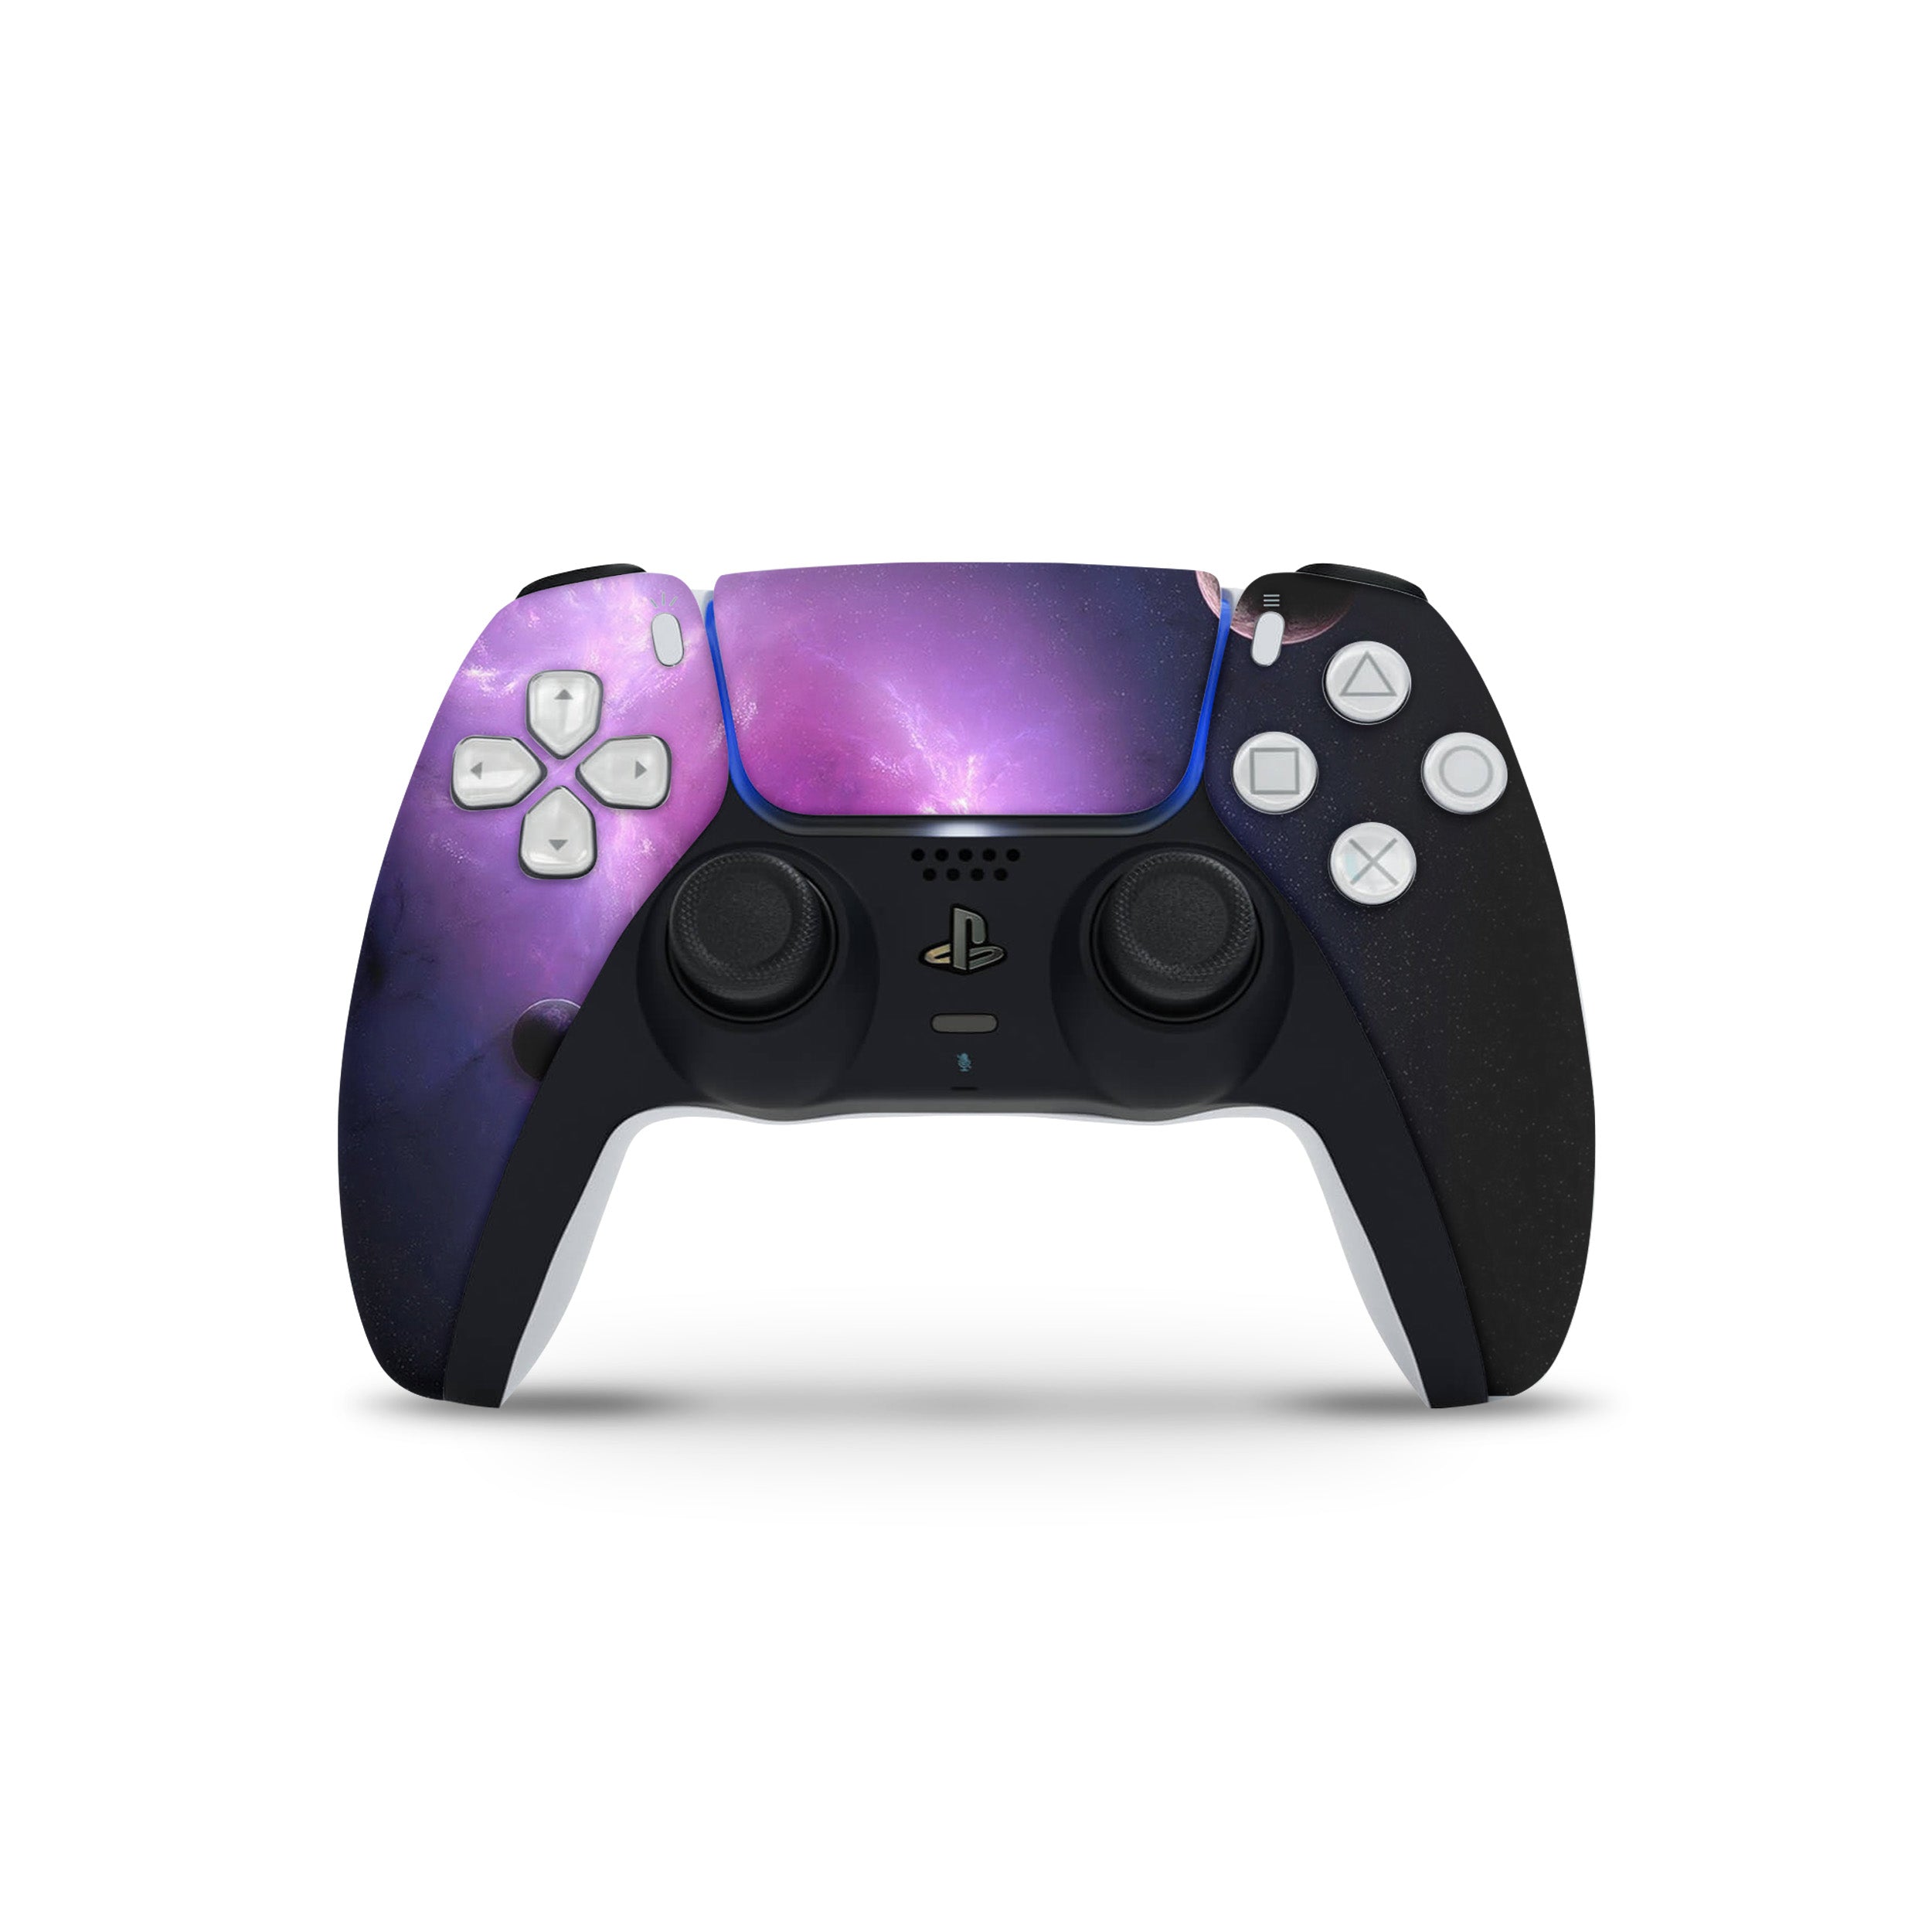 A video game skin featuring a Space design for the PS5 DualSense Controller.